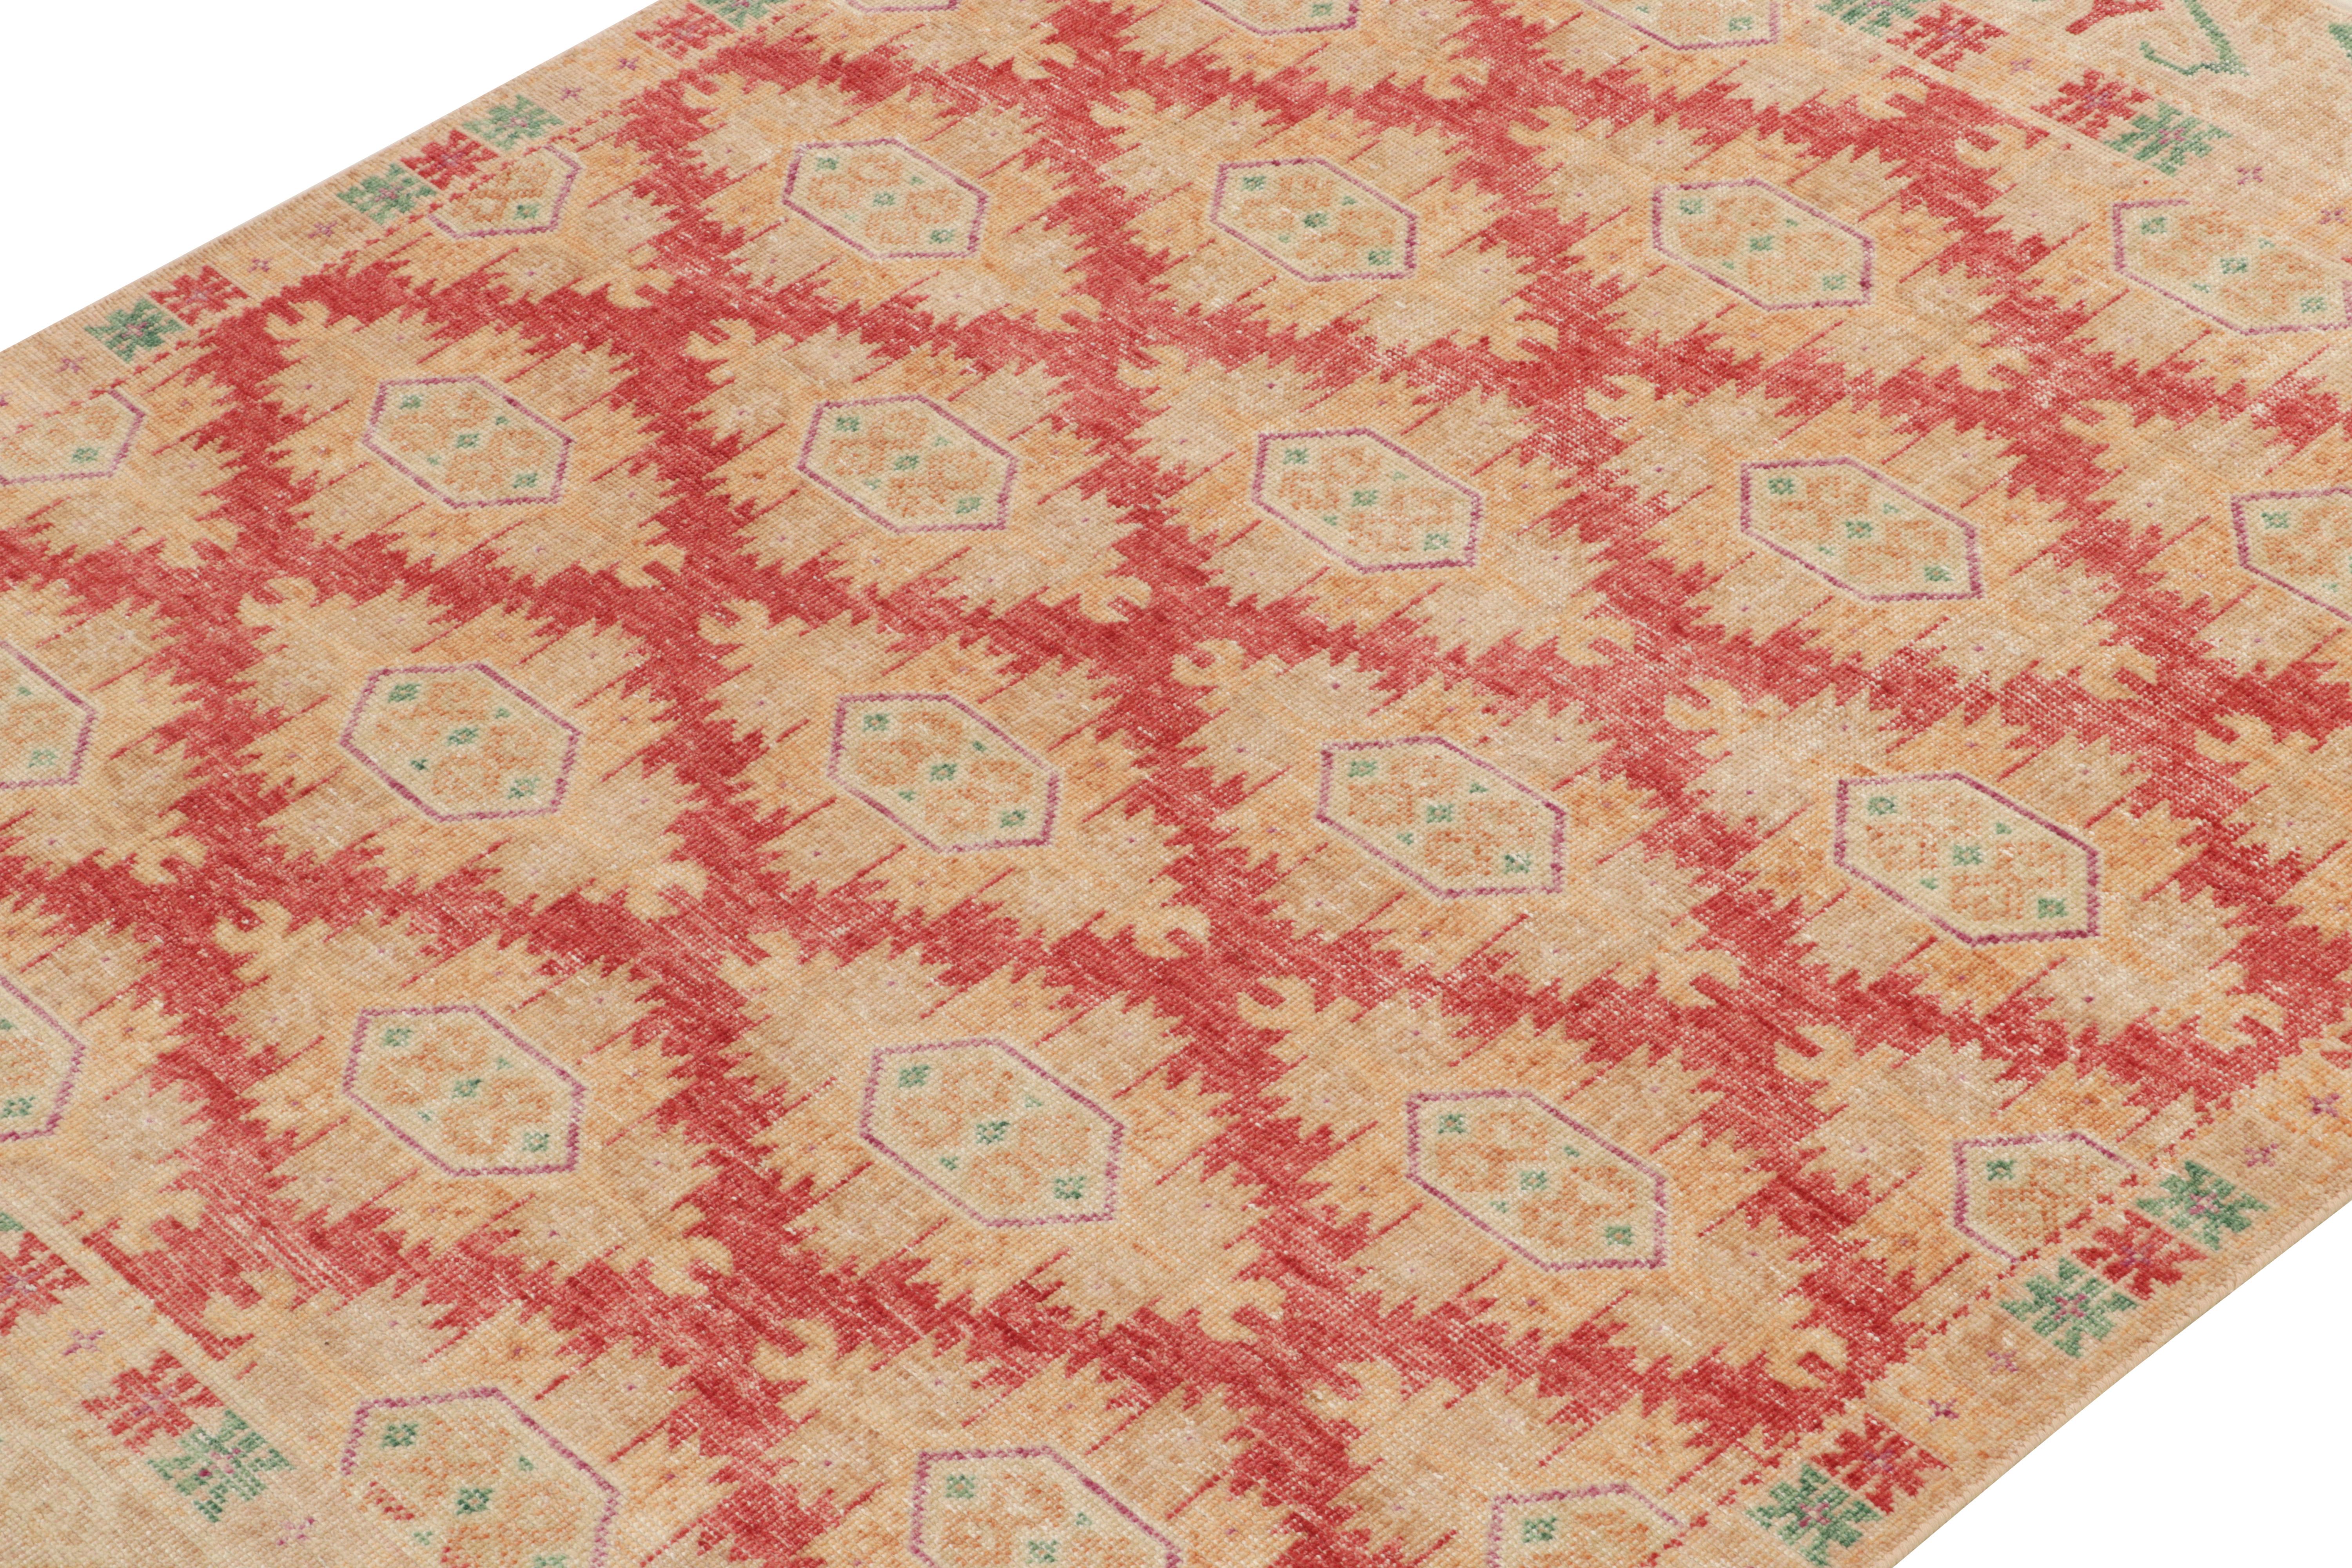 Indian Rug & Kilim's Distressed Style Rug in Red, Gold, Green Geometric Pattern For Sale